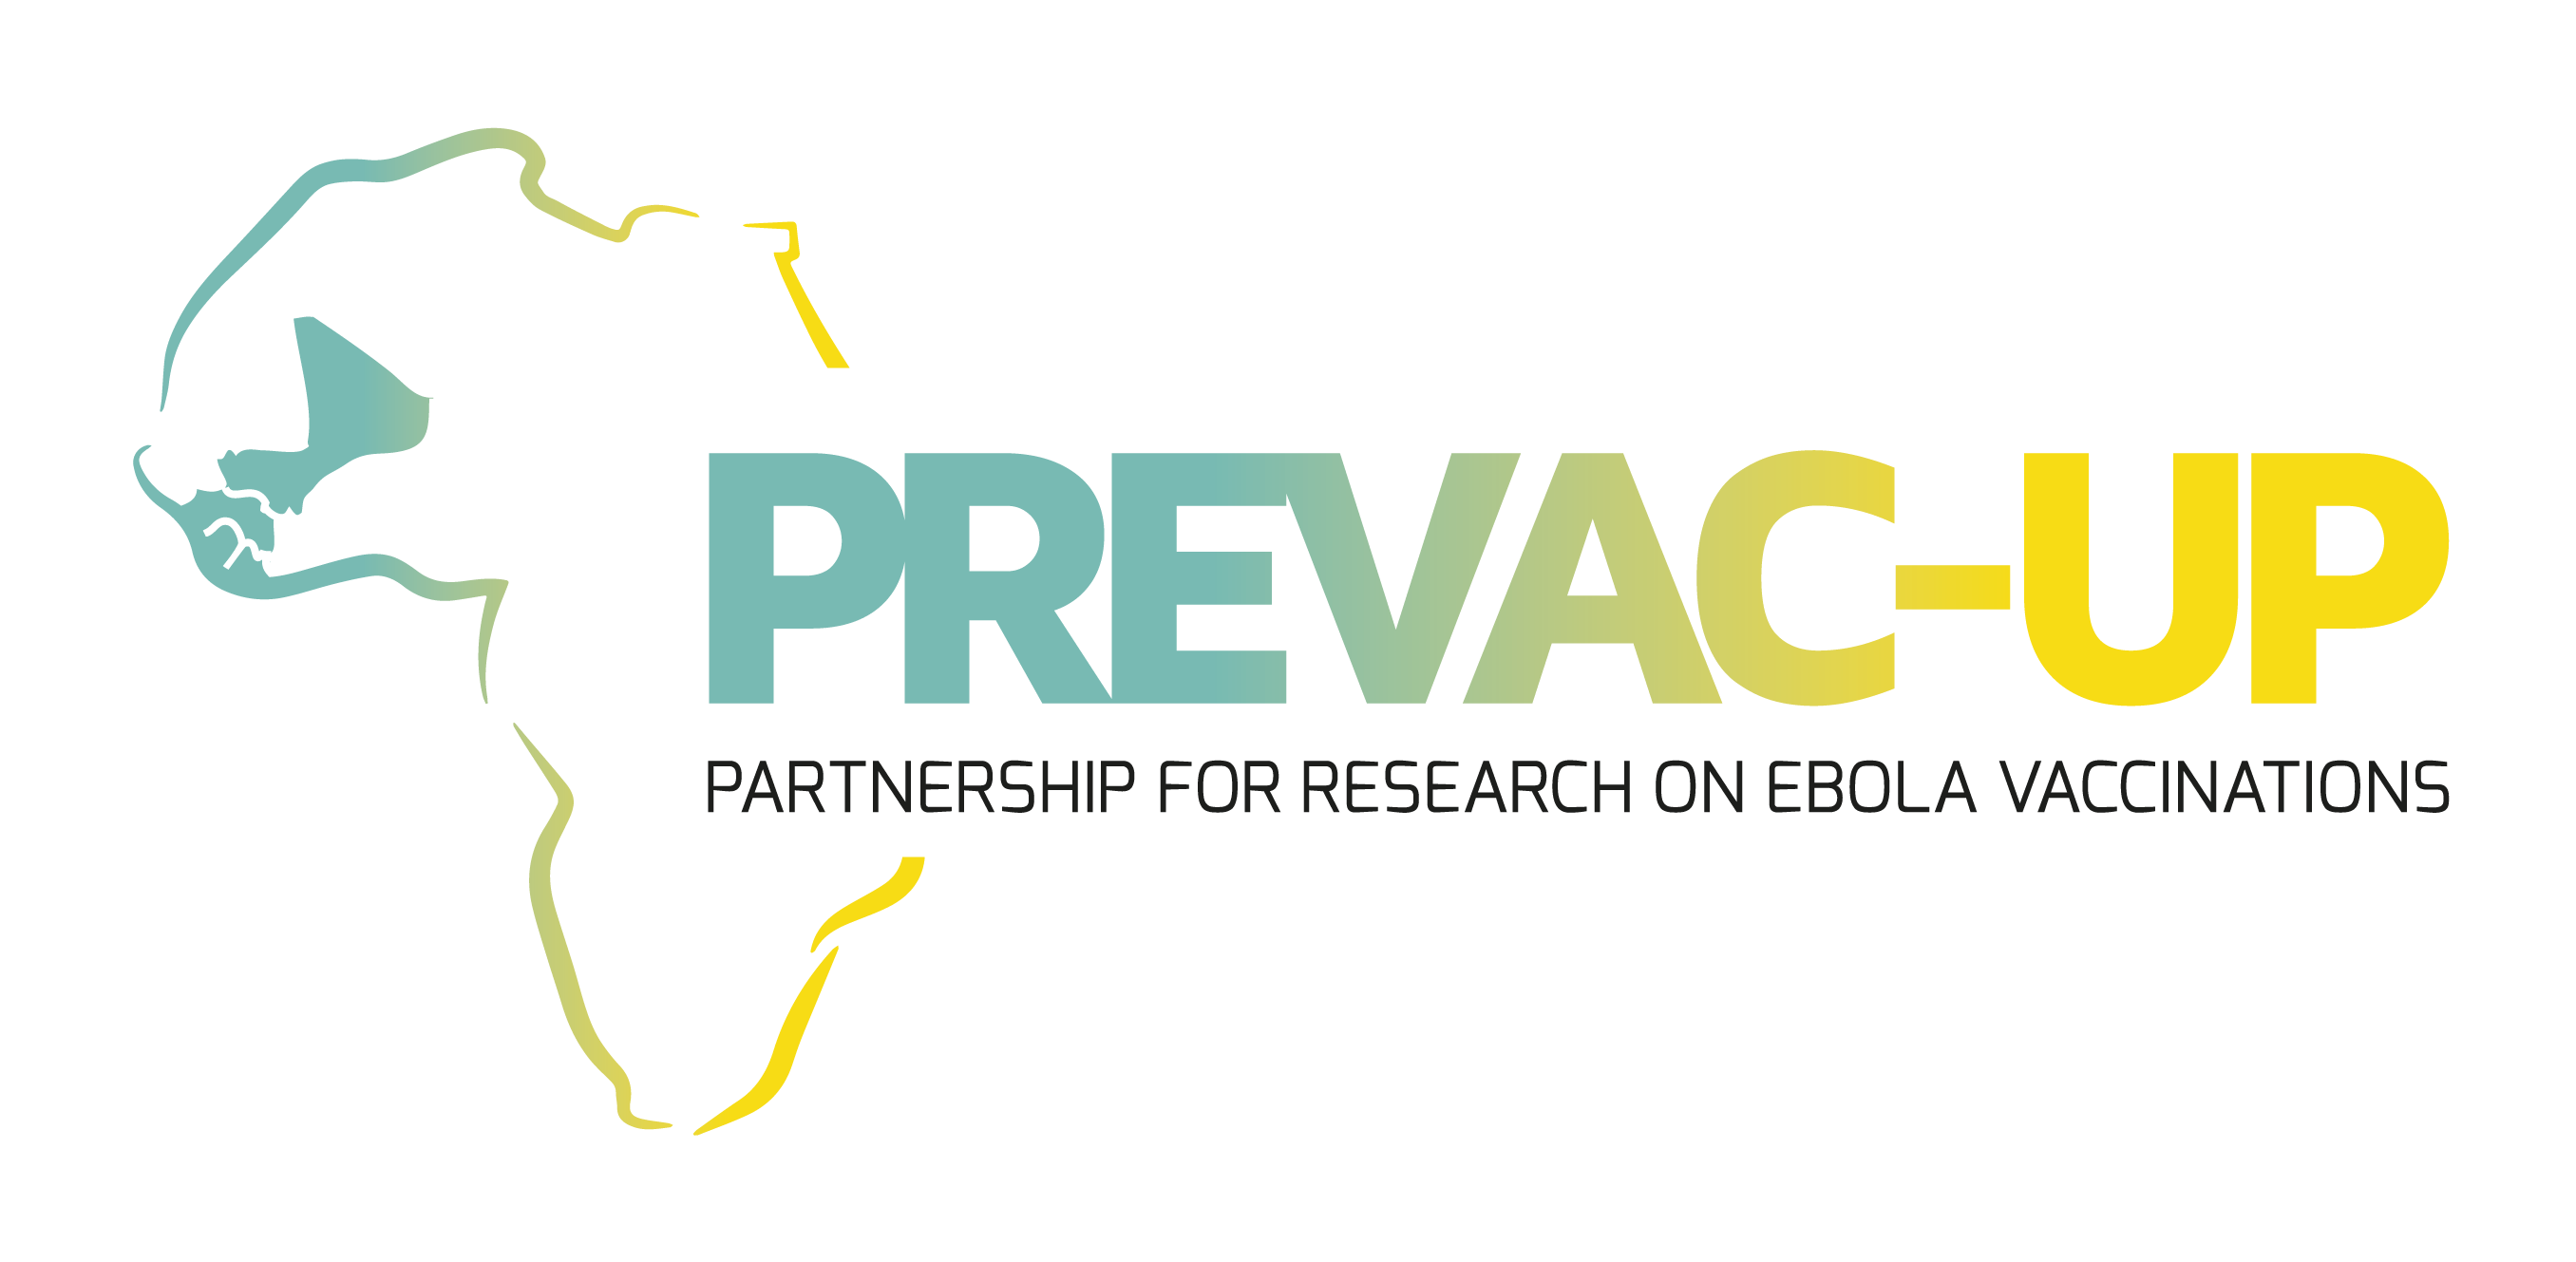 The Partnership for Research on Ebola Vaccinations-extended follow-up and clinical research capacity build-UP